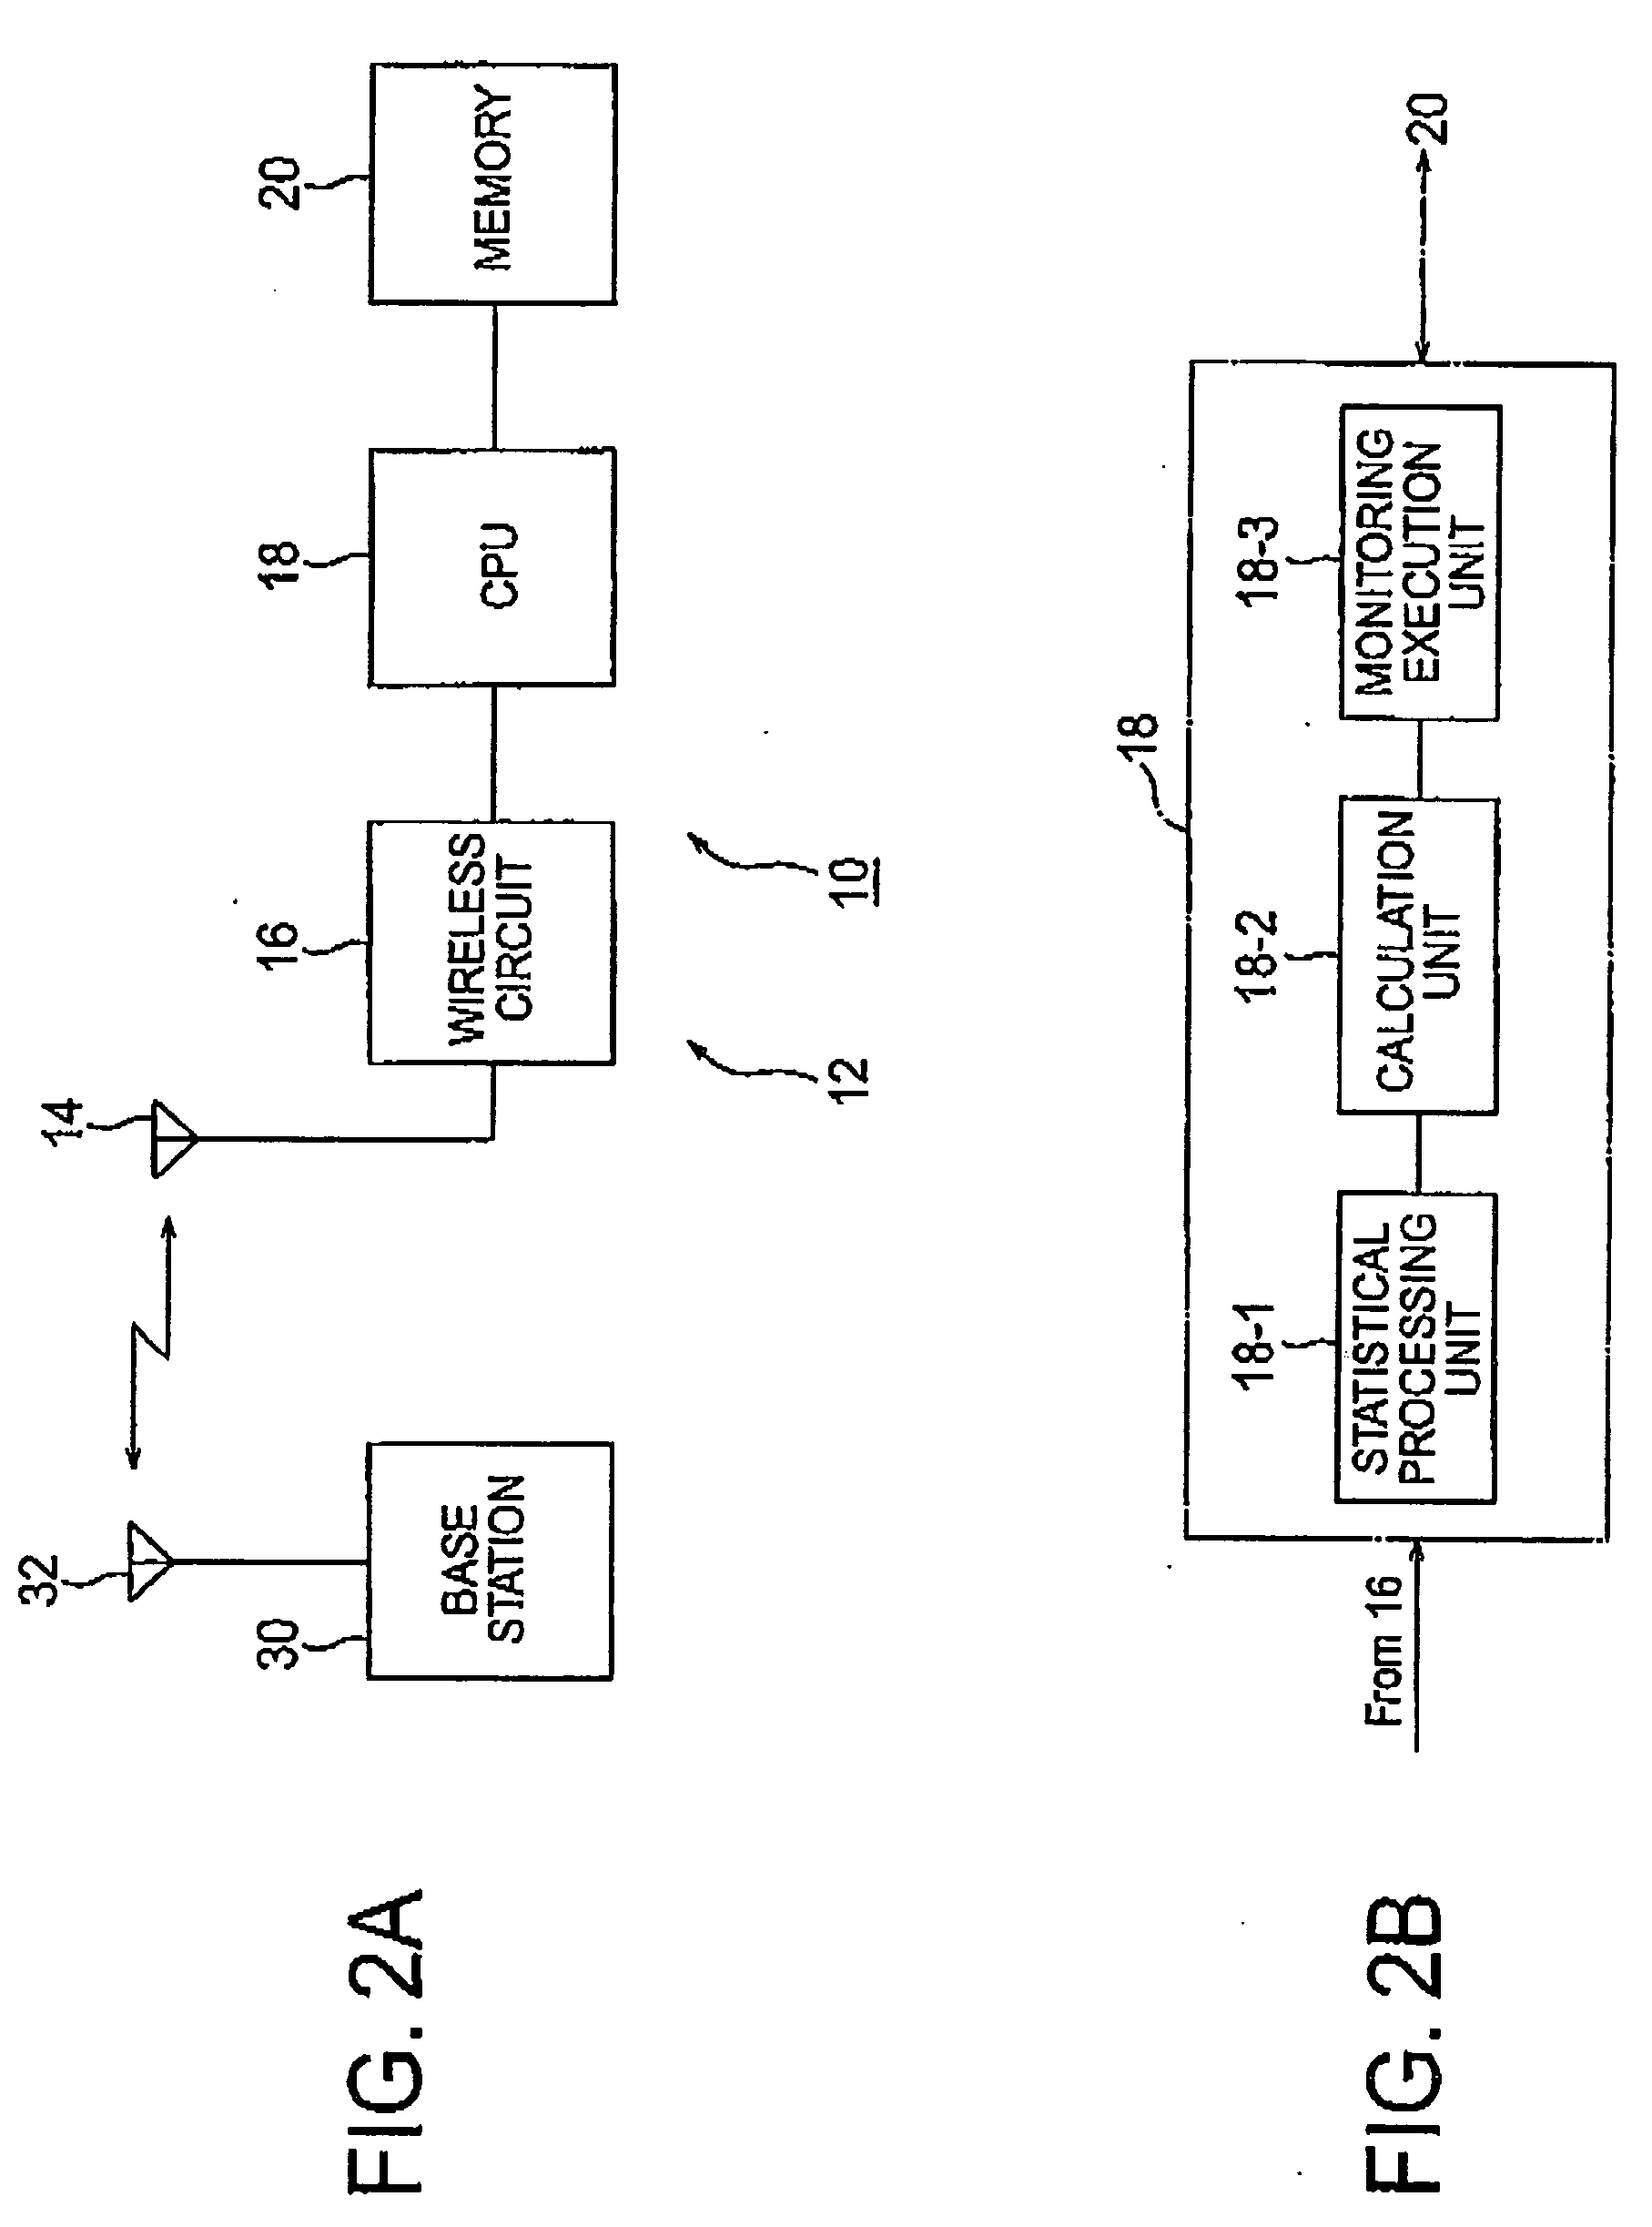 Radio-wave state monitoring method and device thereof, cell reselection method employing radio-wave state monitoring method and device thereof, and mobile wireless communication device